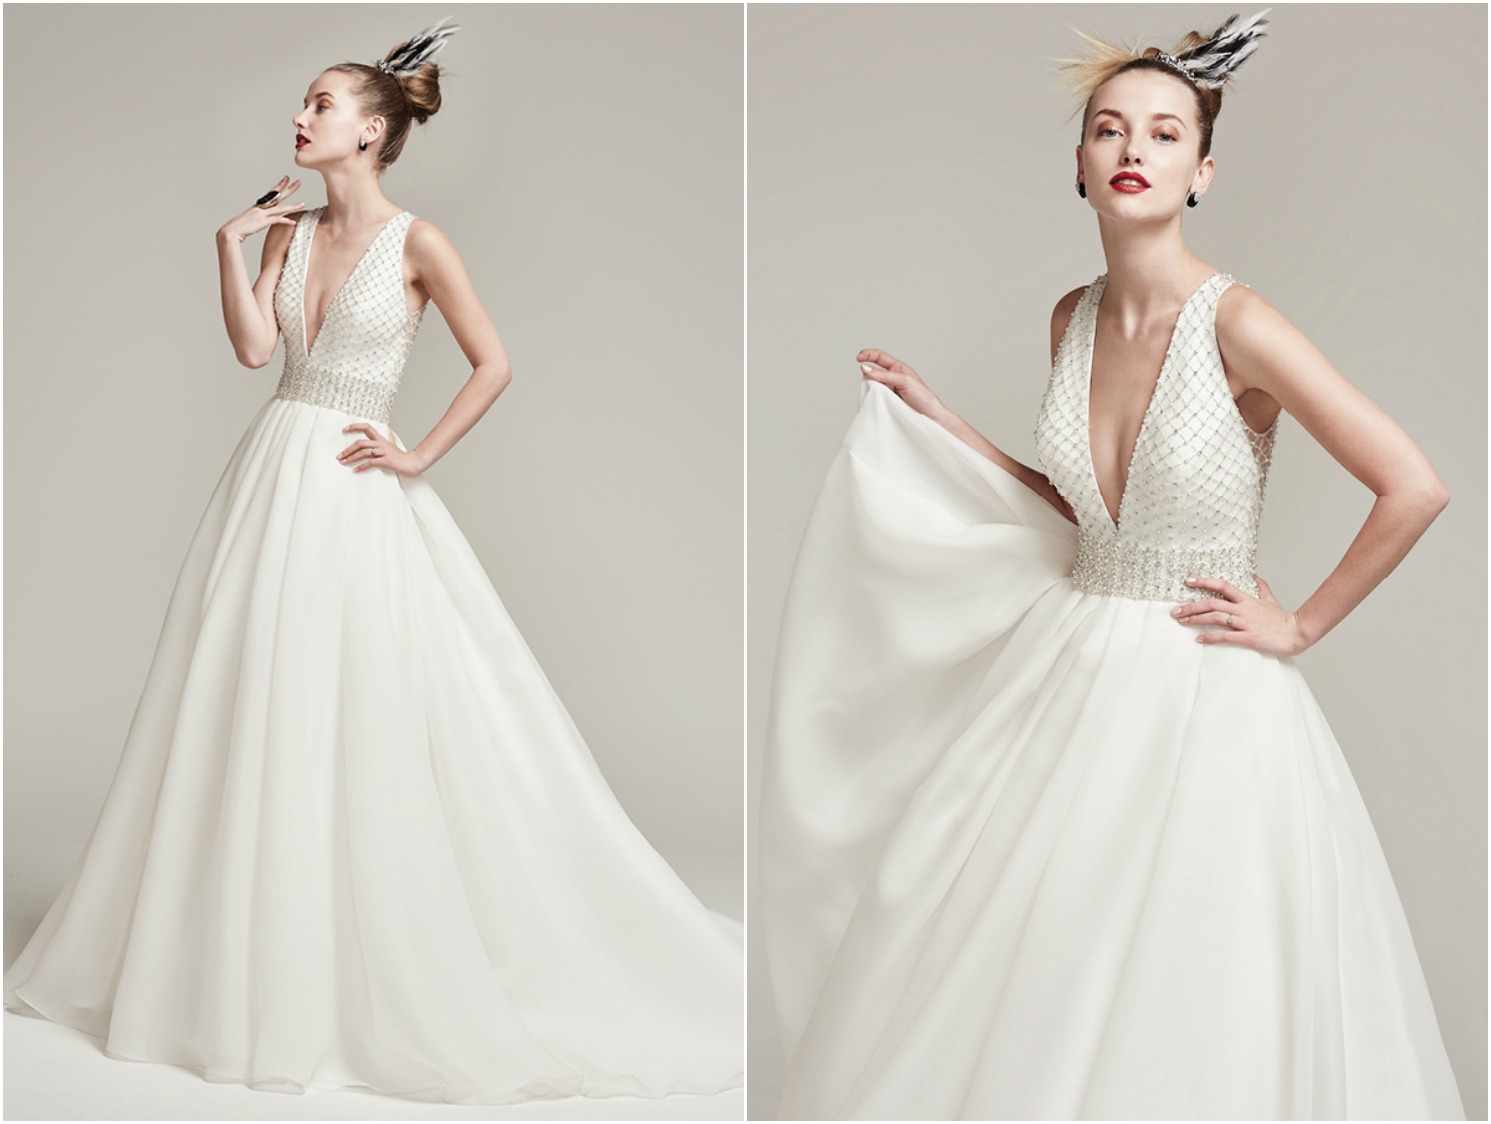 Lattice patterns of Swarovski crystals and pearls decorate this demure Shavon organza ball gown with plunging V-neckline and hidden pockets. Finished with a stunning embellished illusion back and crystal buttons over zipper closure. 

<a href="https://www.maggiesottero.com/sottero-and-midgley/tamirys/9885" target="_blank">Sottero &amp; Midgley</a>